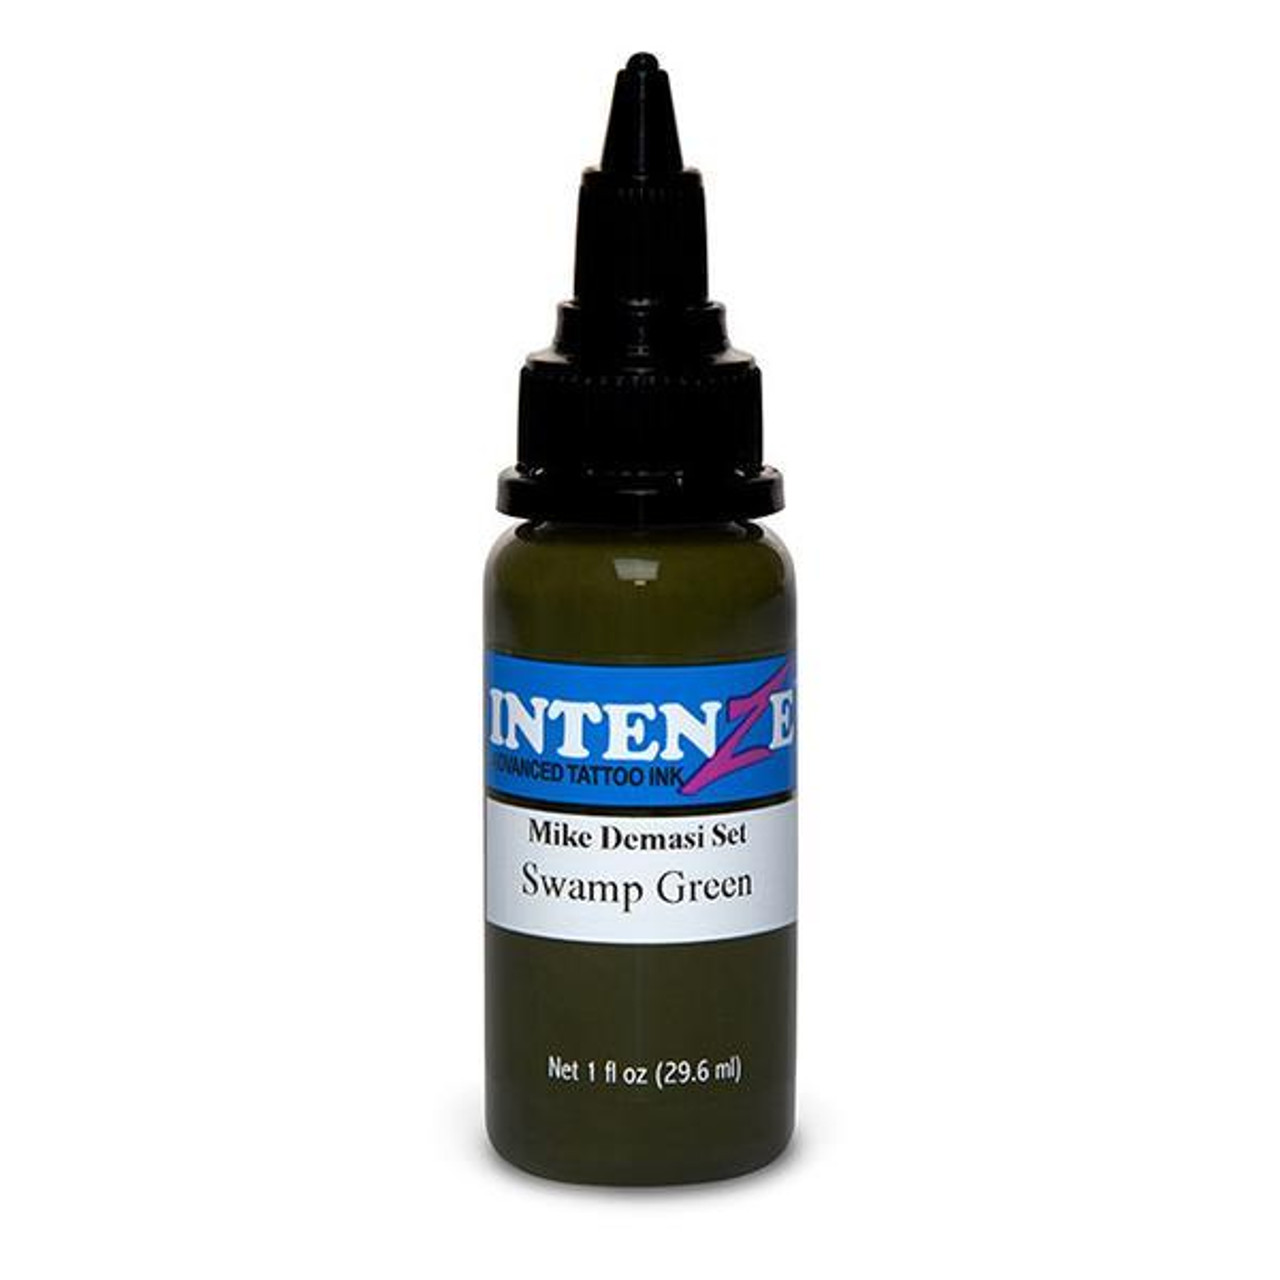 Intenze Swamp Green Tattoo Ink - 1oz. Mike Demasi Color Portrait Series Exp 8/31/24